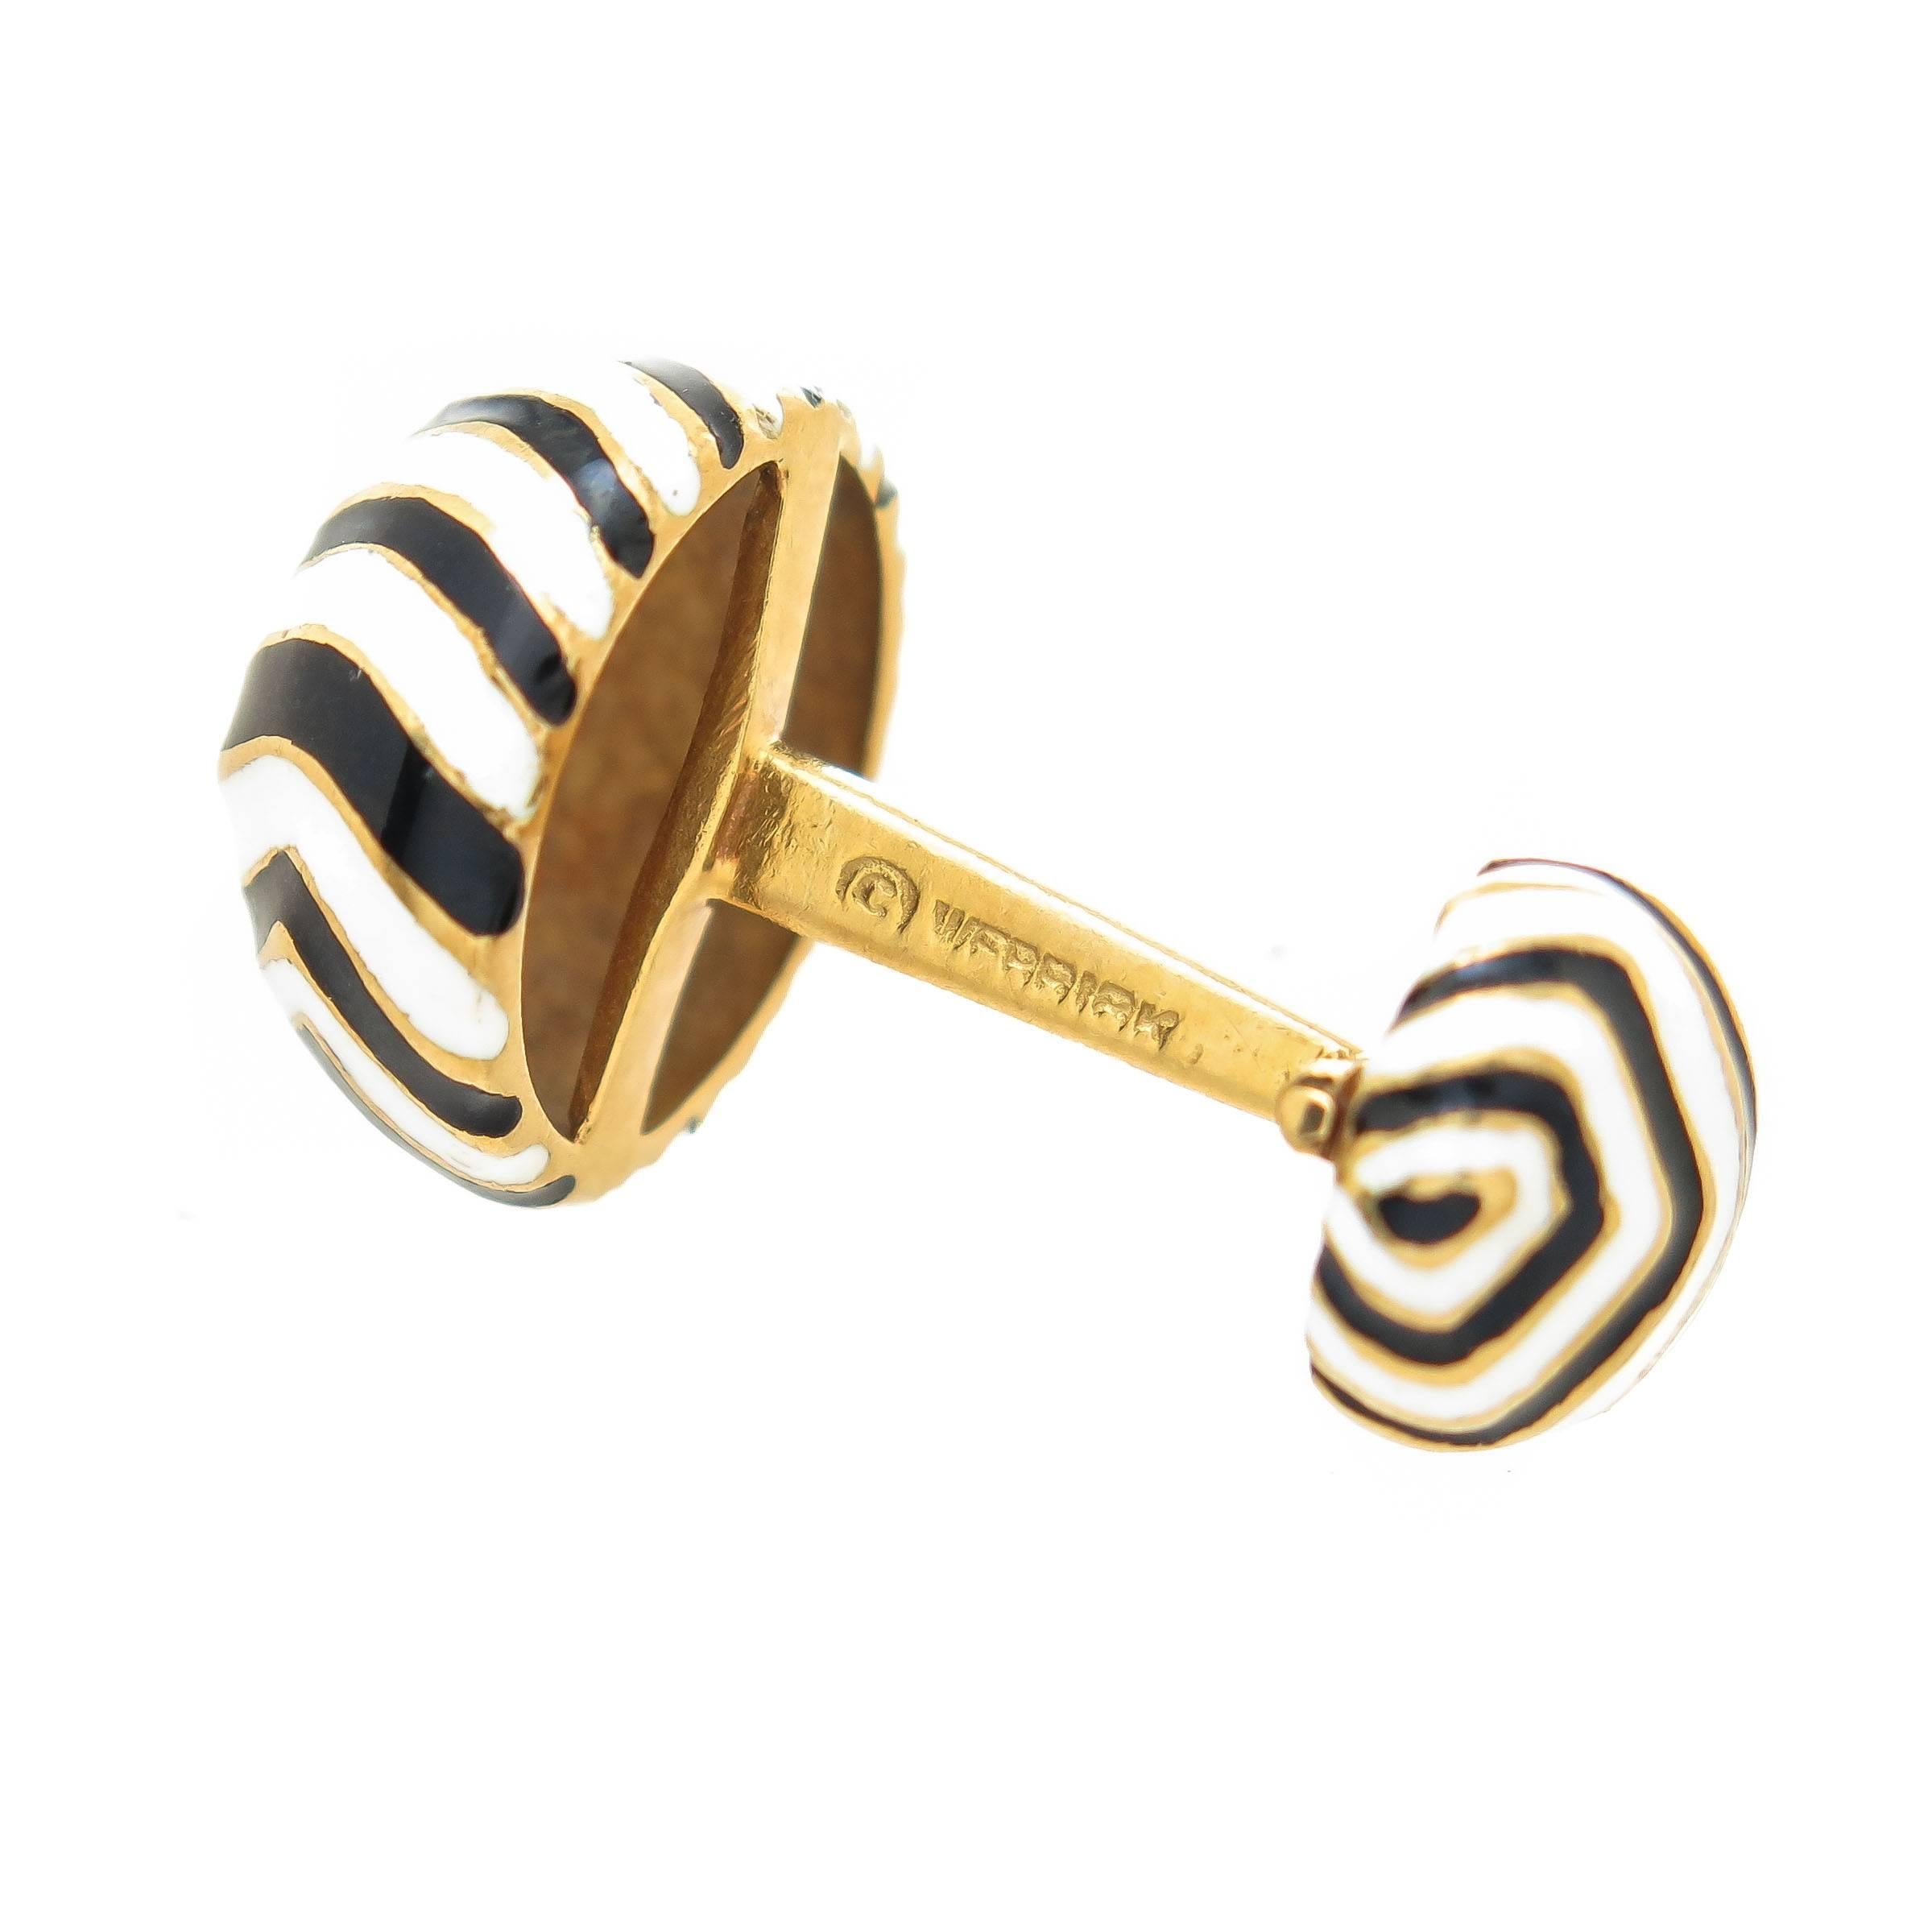 Circa 1990 David Webb Classic Cufflinks, 18K Yellow Gold and measuring 5/8 X 5/8 inch across the top, finished in bright white and black enamel. Easy to put on and take off mechanism.